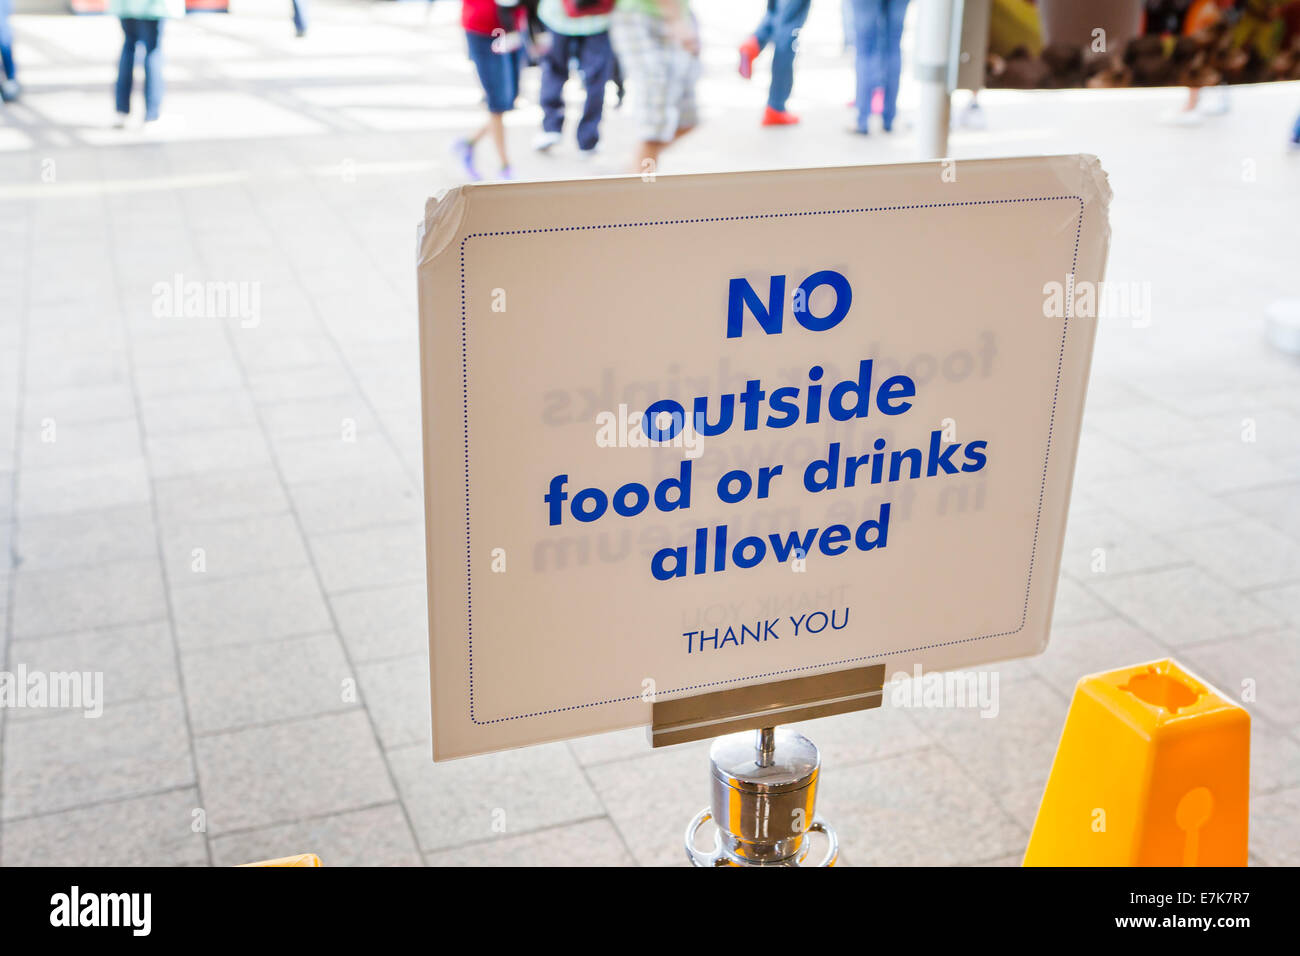 No outside food or drinks allowed sign at cafeteria entrance - USA Stock Photo